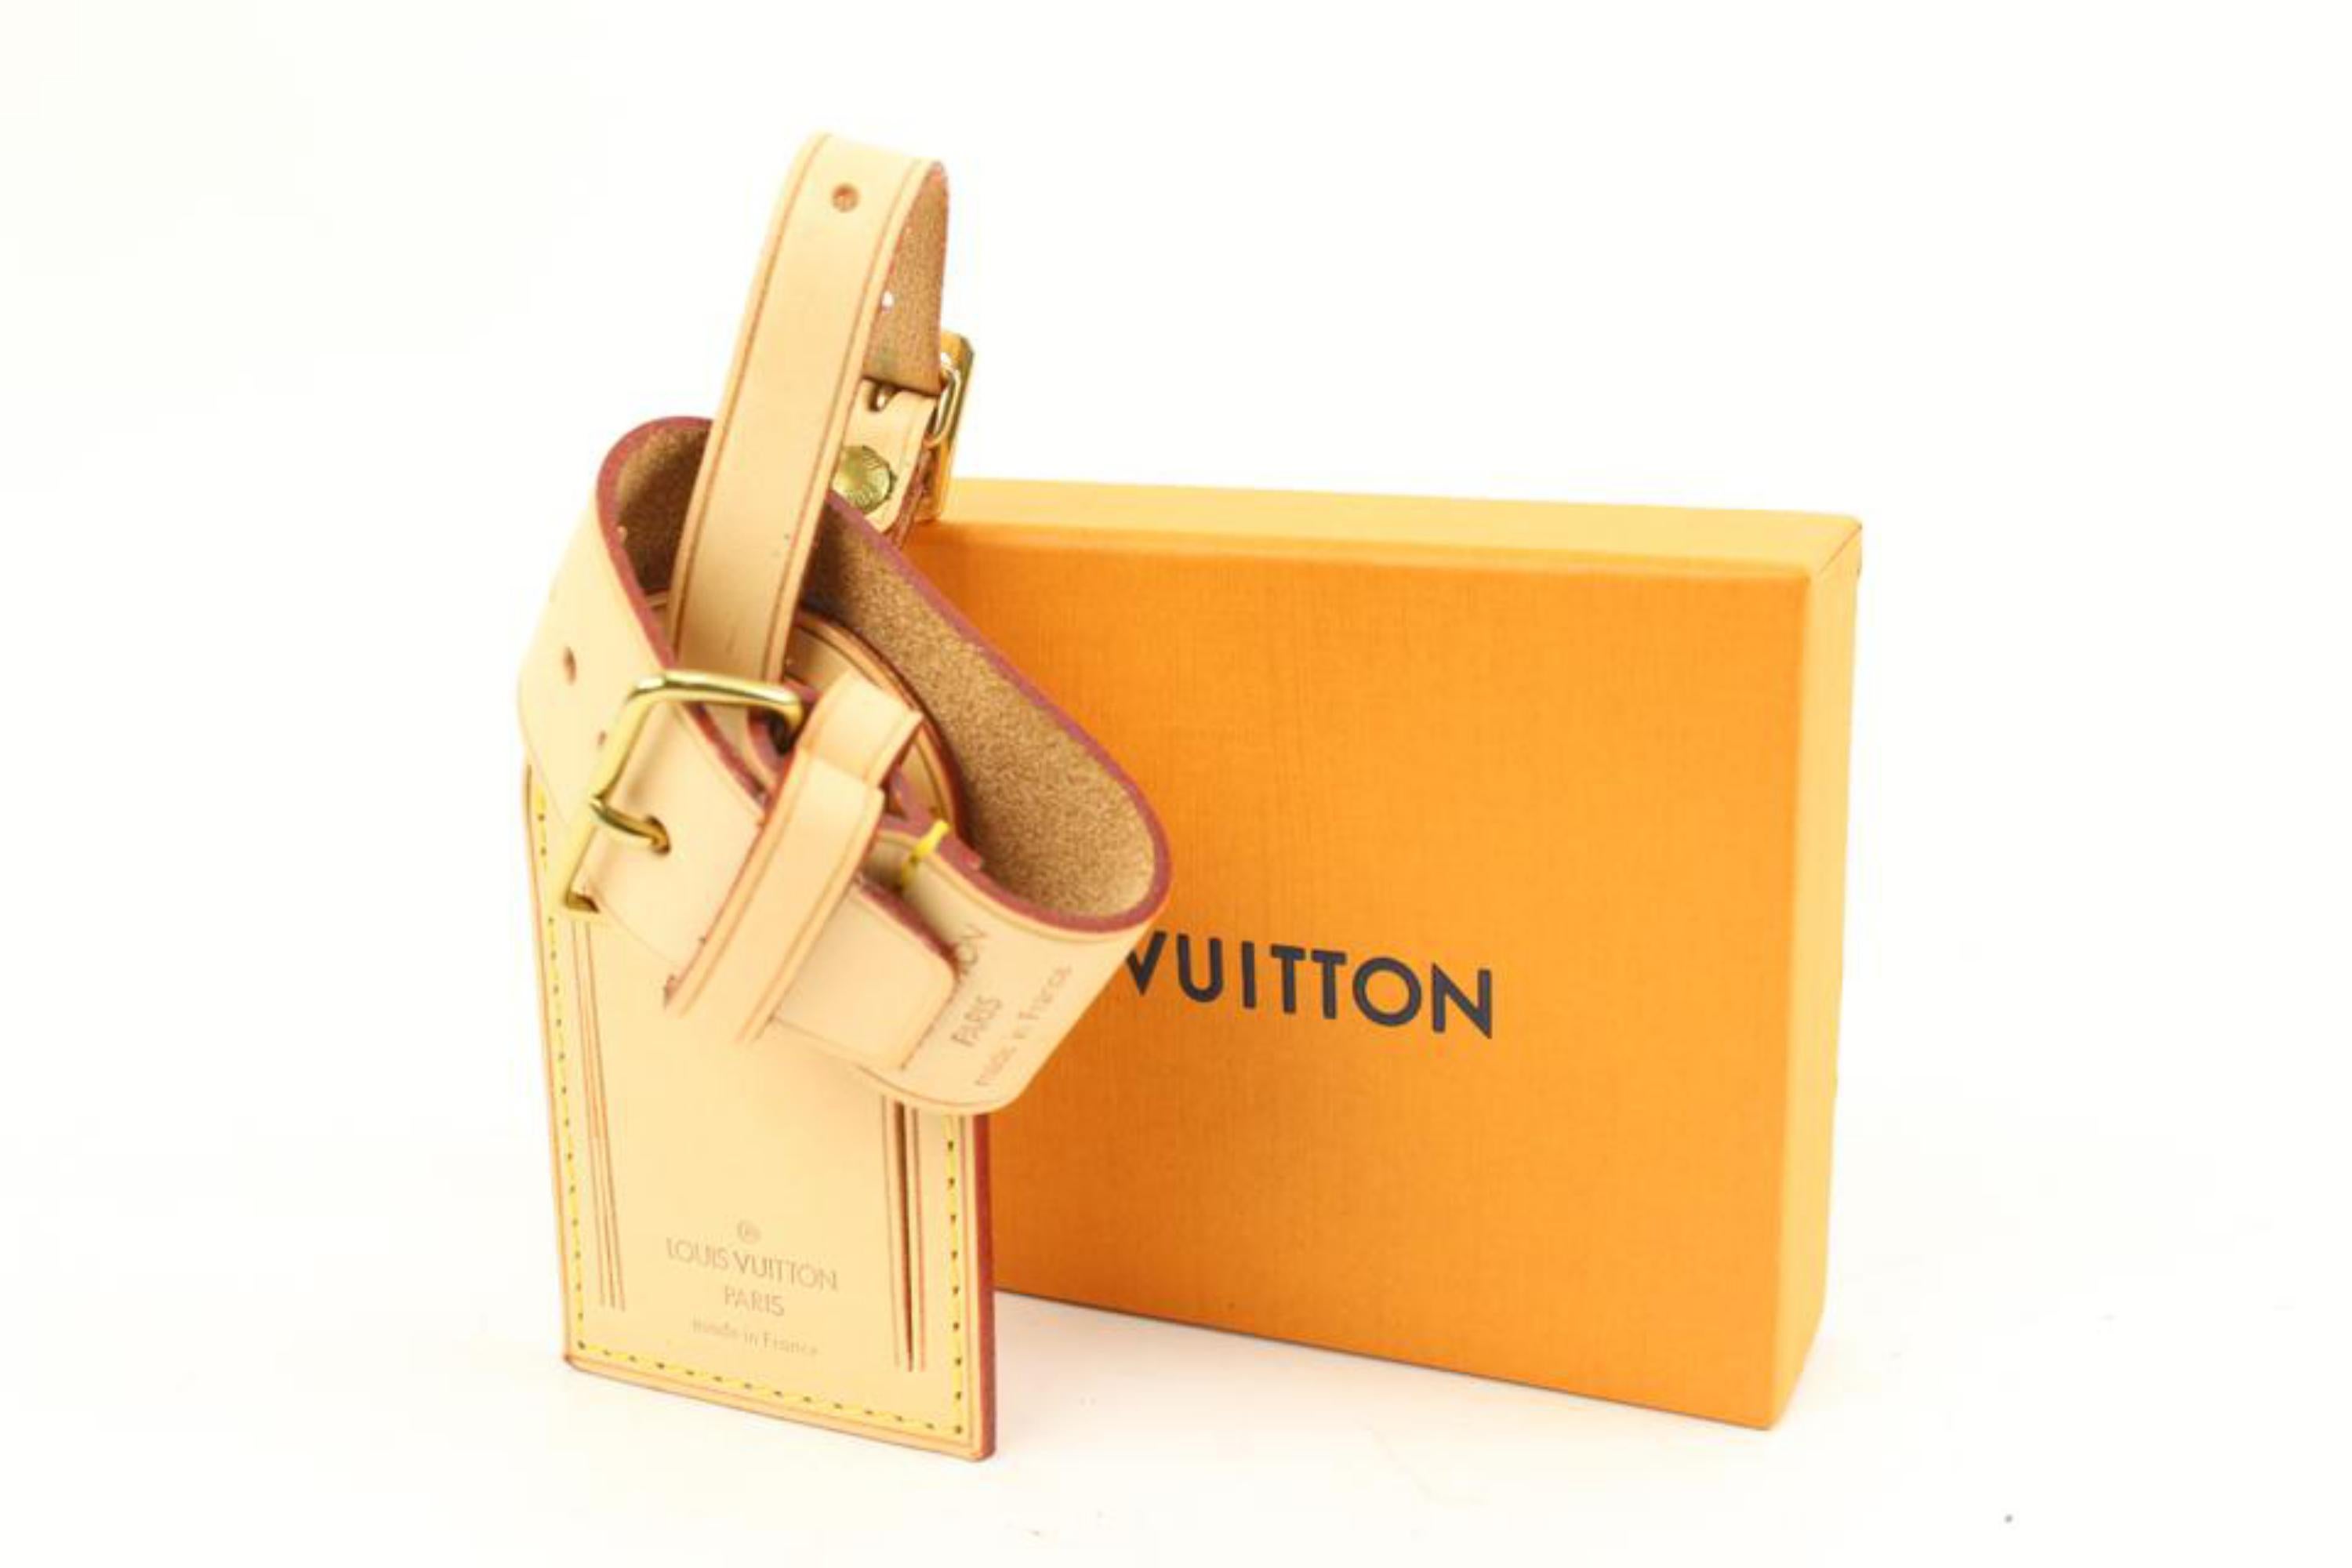 Louis Vuitton Vachetta Leather Luggage Tag and Poignet Bag Charm Keepall 75lk317s
Made In: France
Measurements: Length:  2